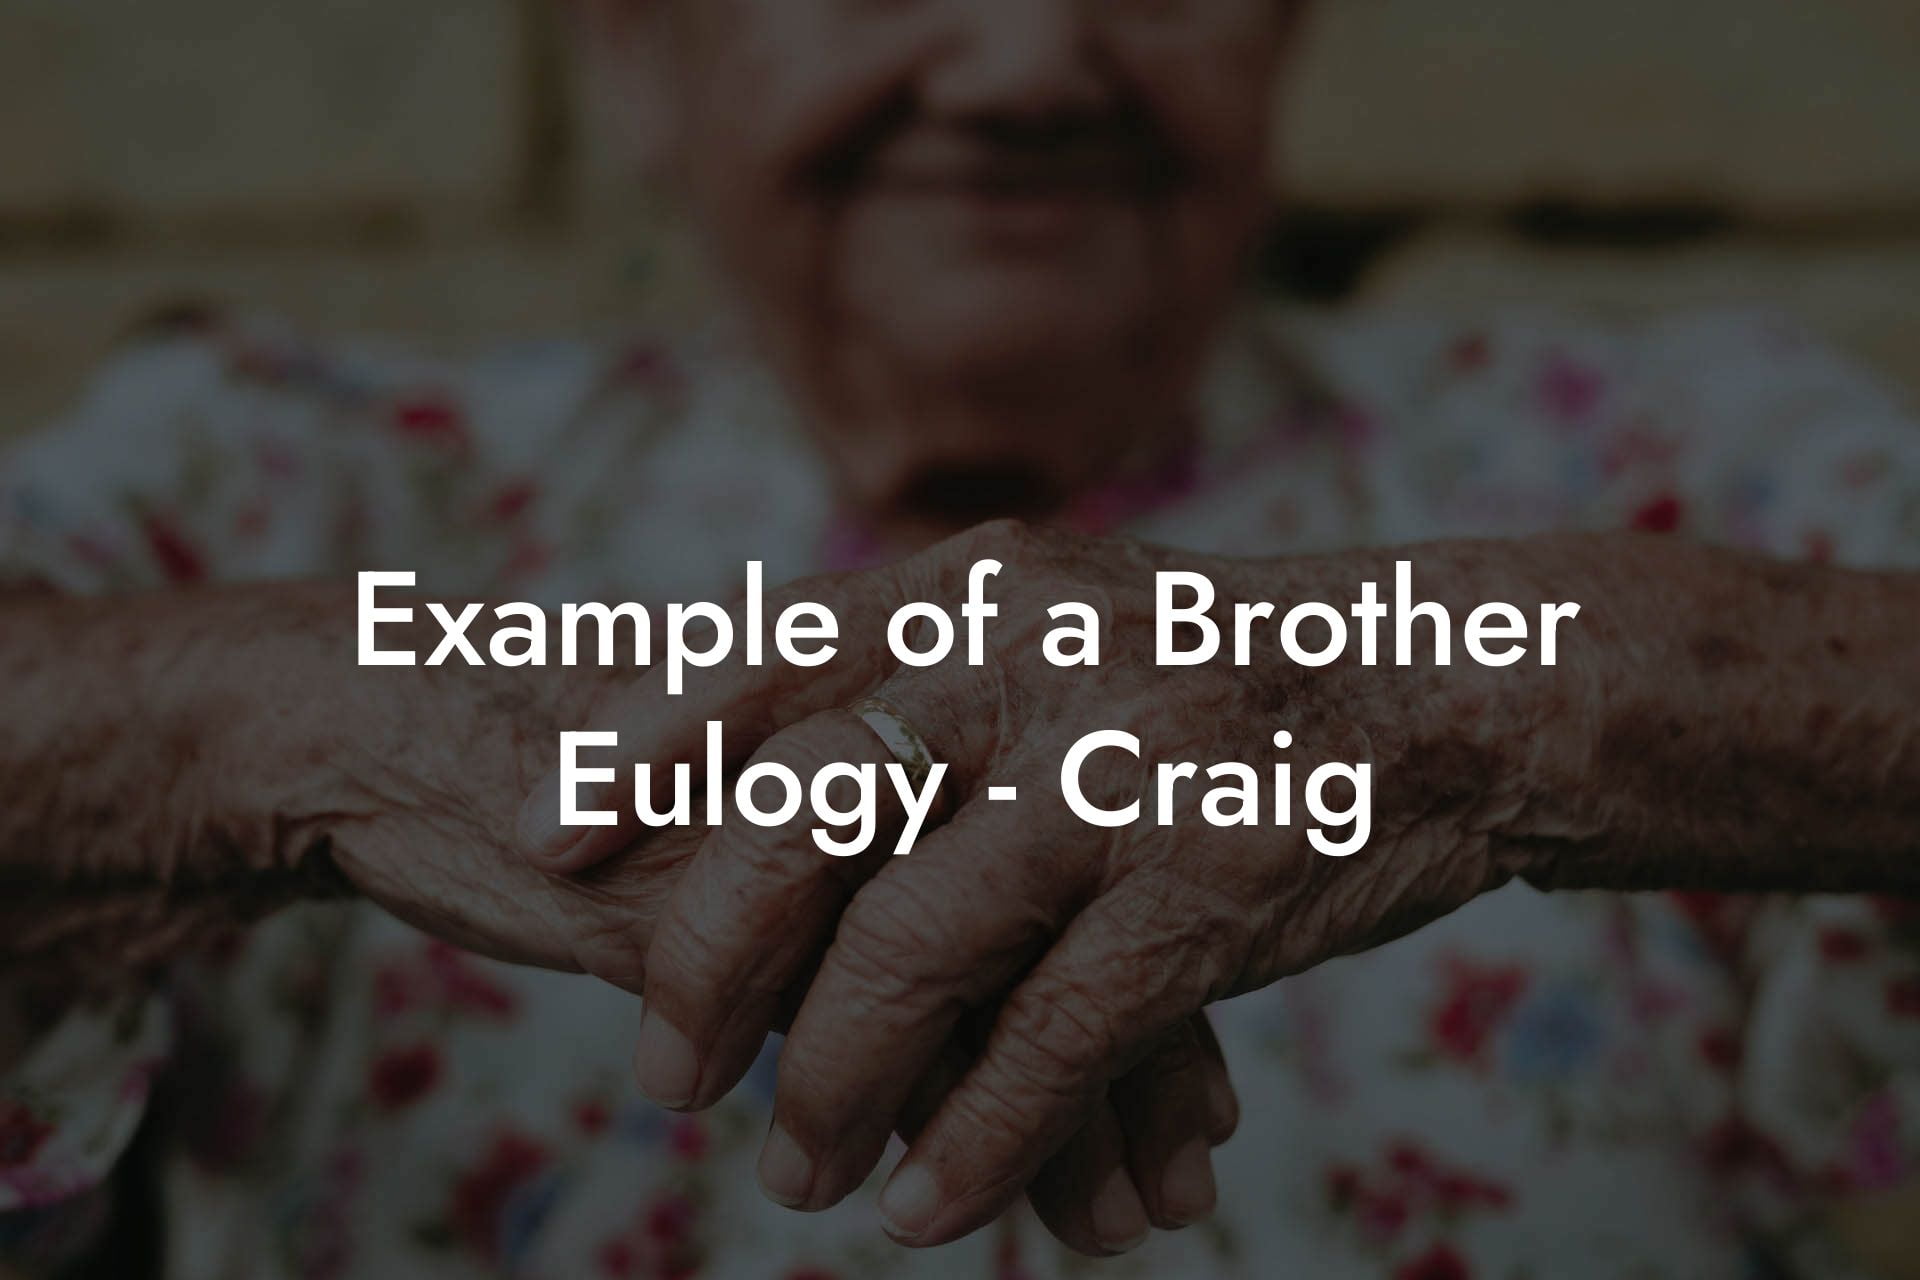 Example of a Brother Eulogy - Craig